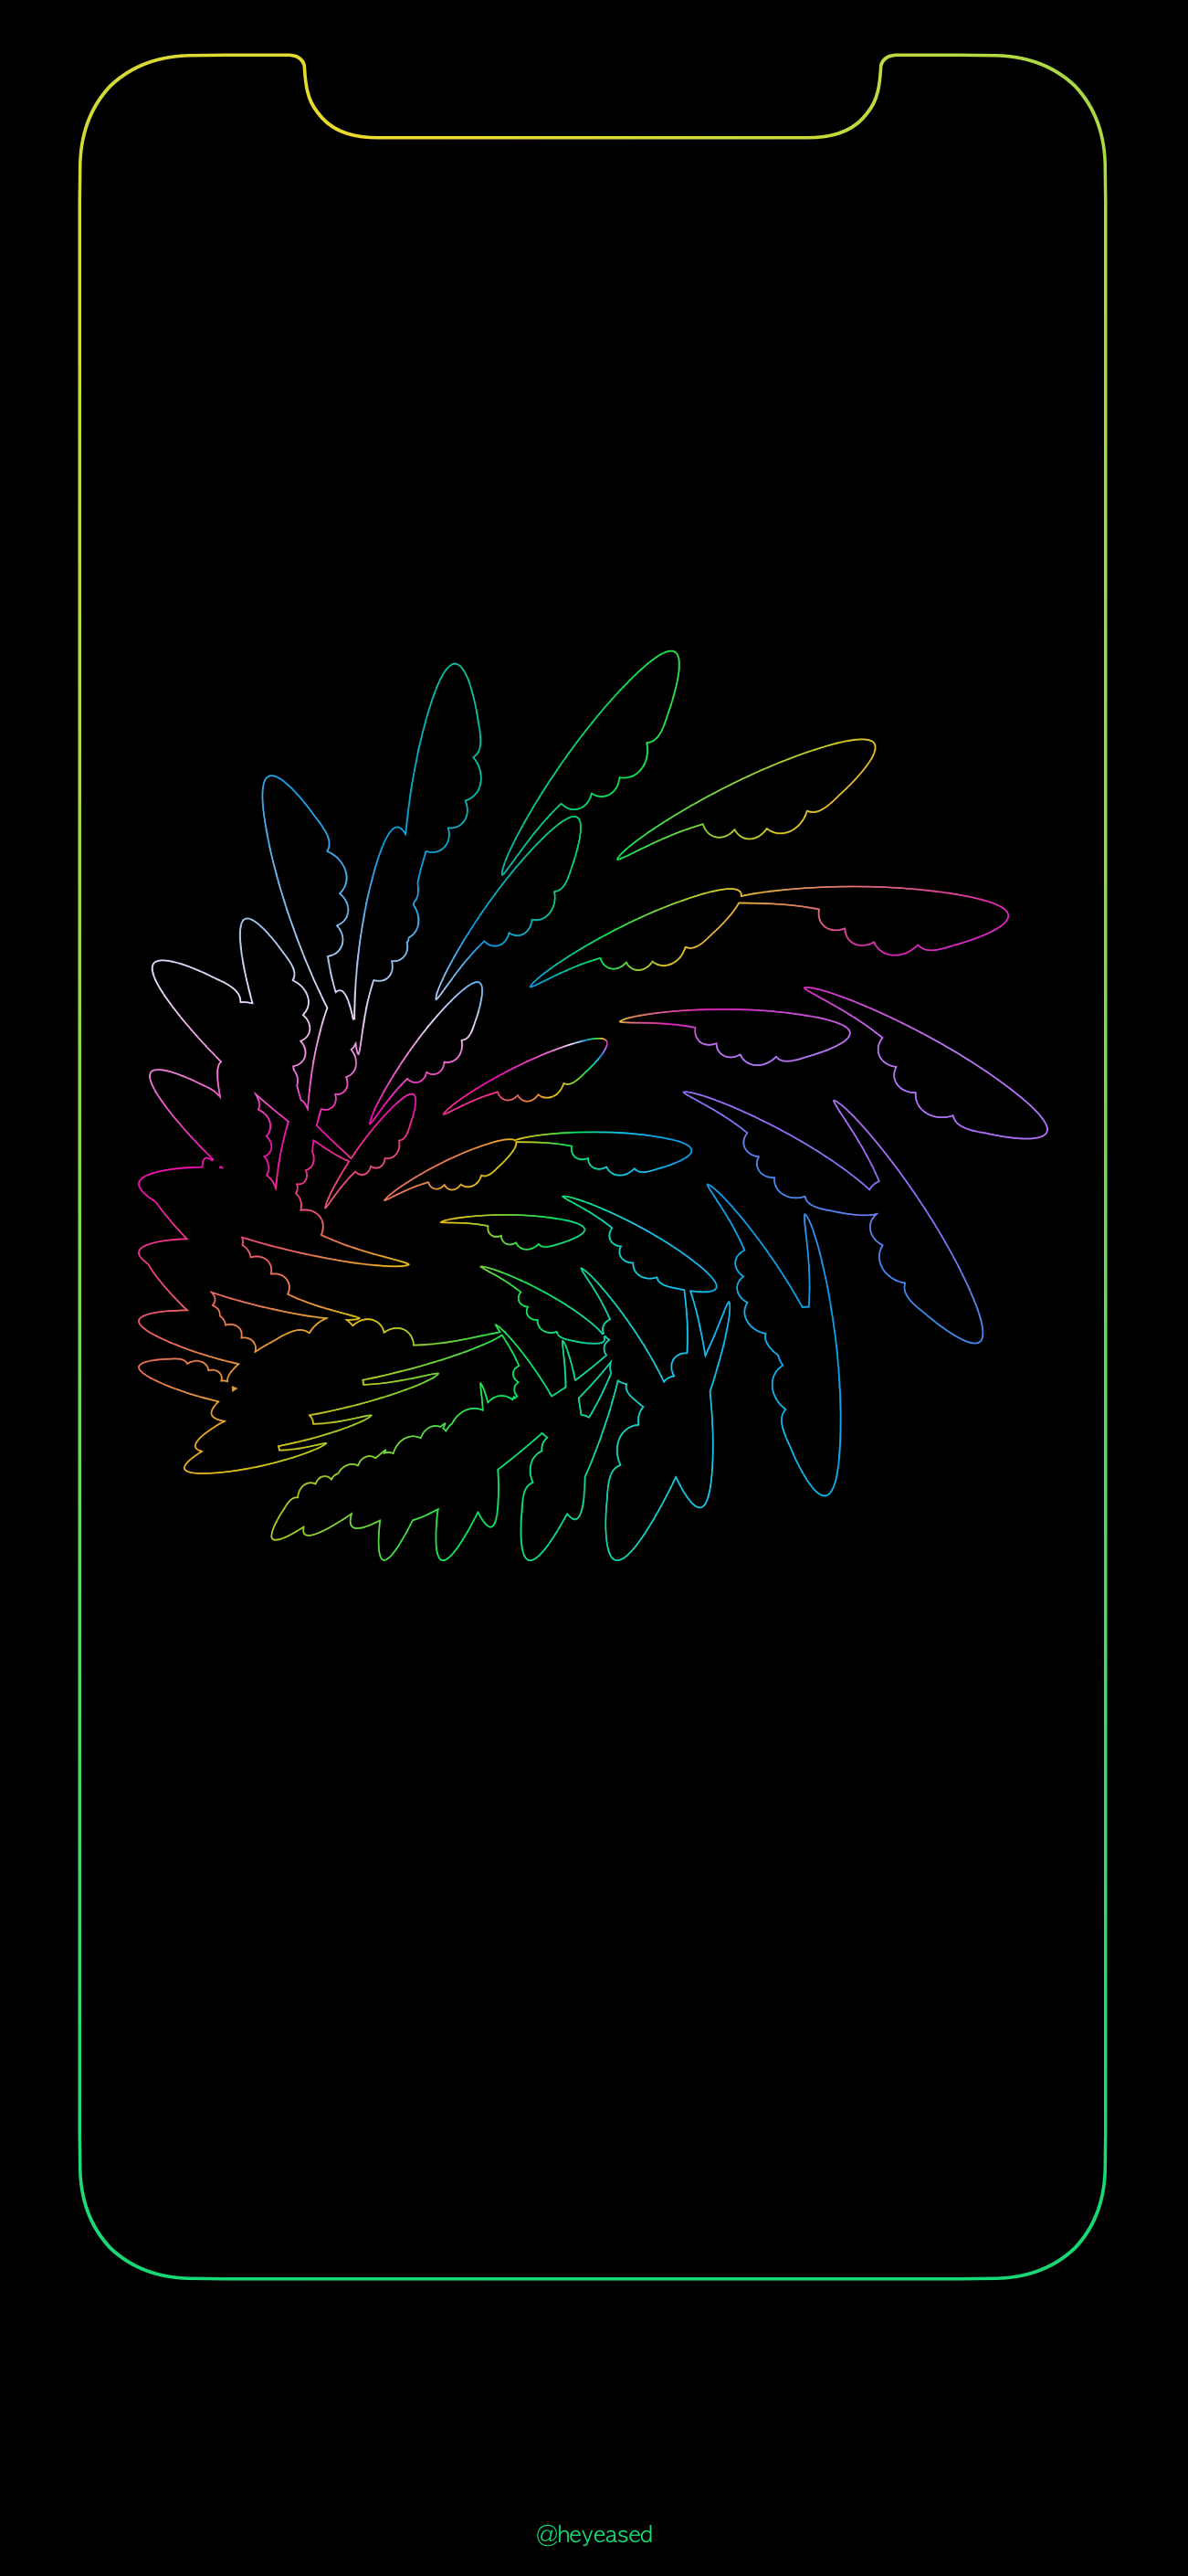 Gorgeous Frame Wallpaper For iPhone X (Ep. 10)